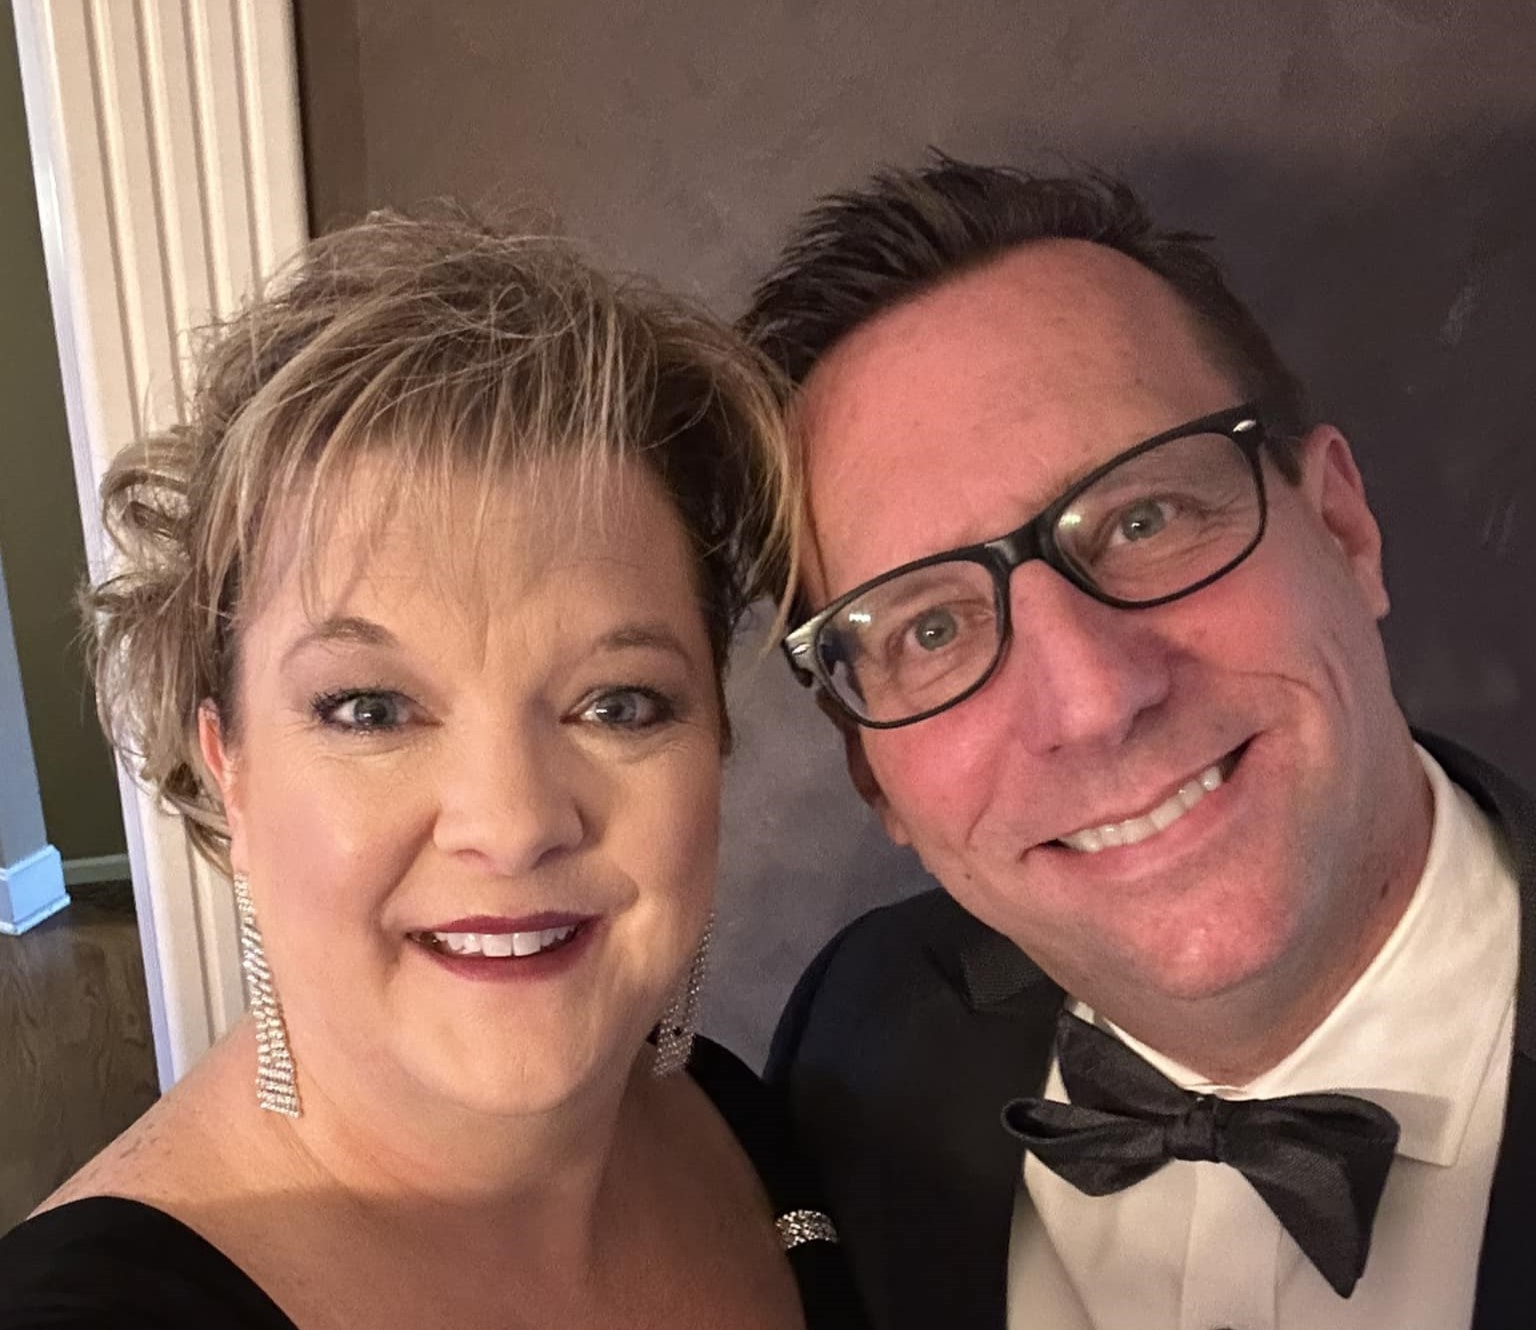 Tammy and Chad Butterfield dressed up and smiling at an awards event.